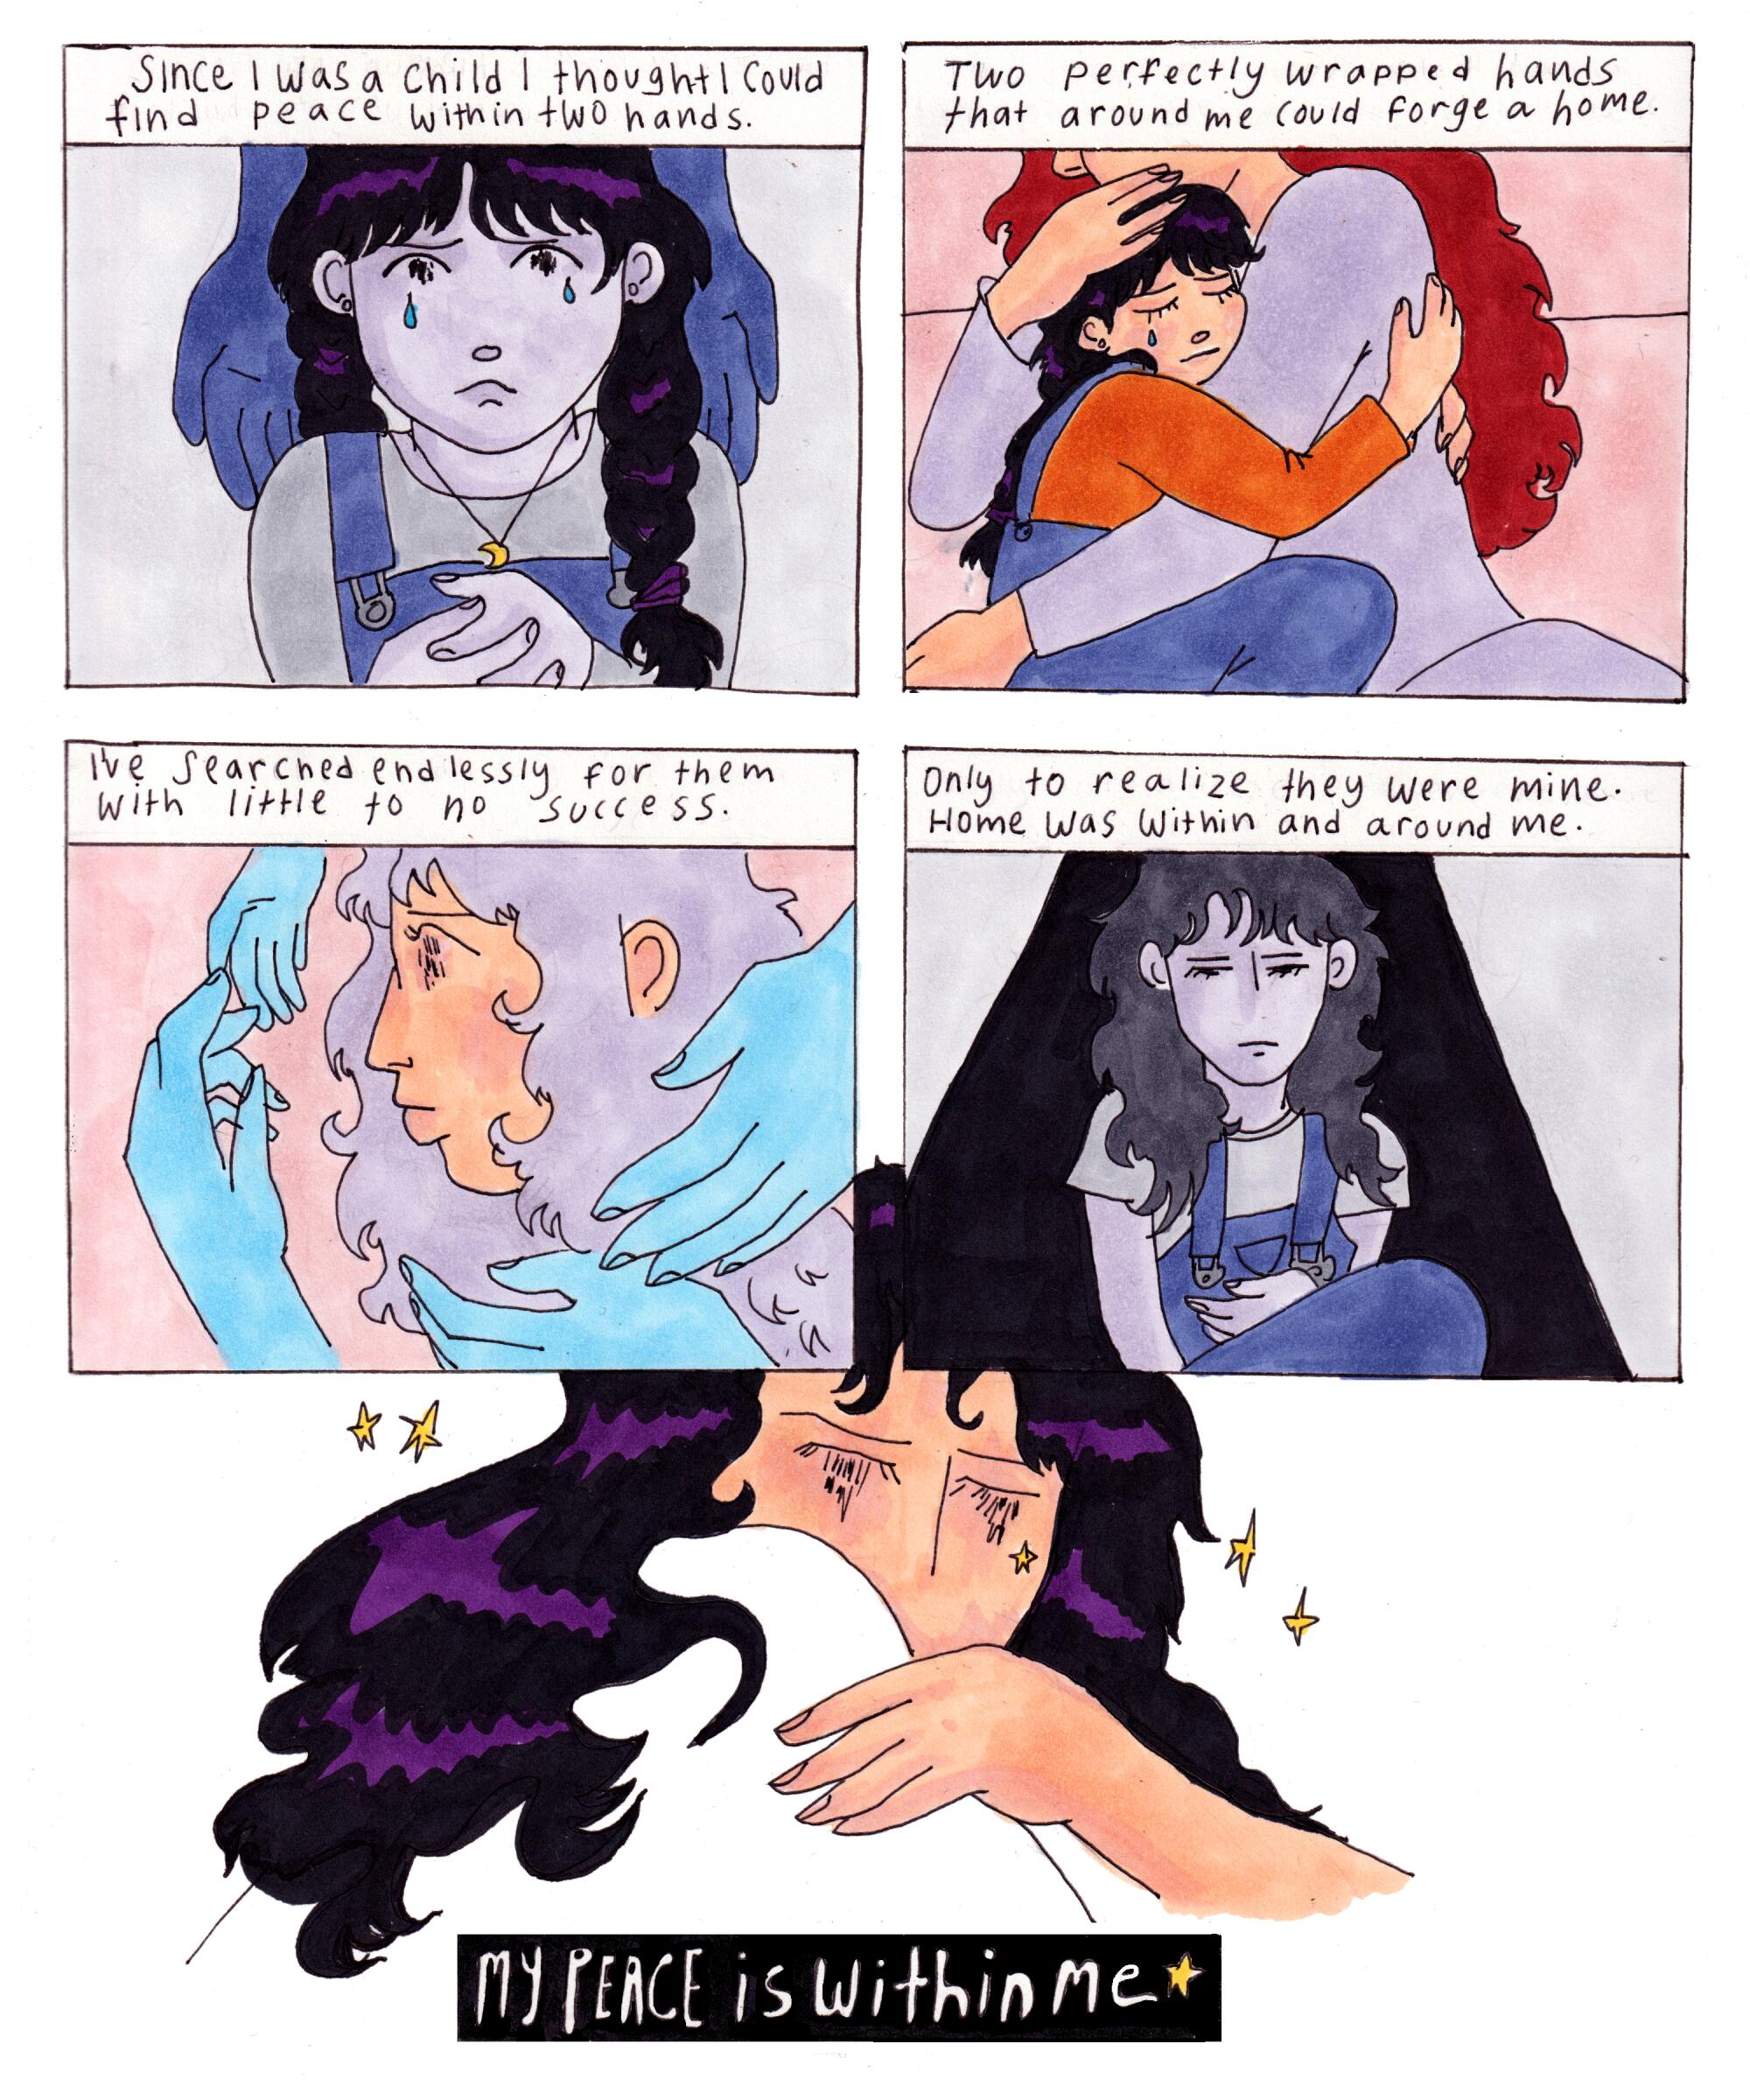 A hand-drawn comic about a sad little girl